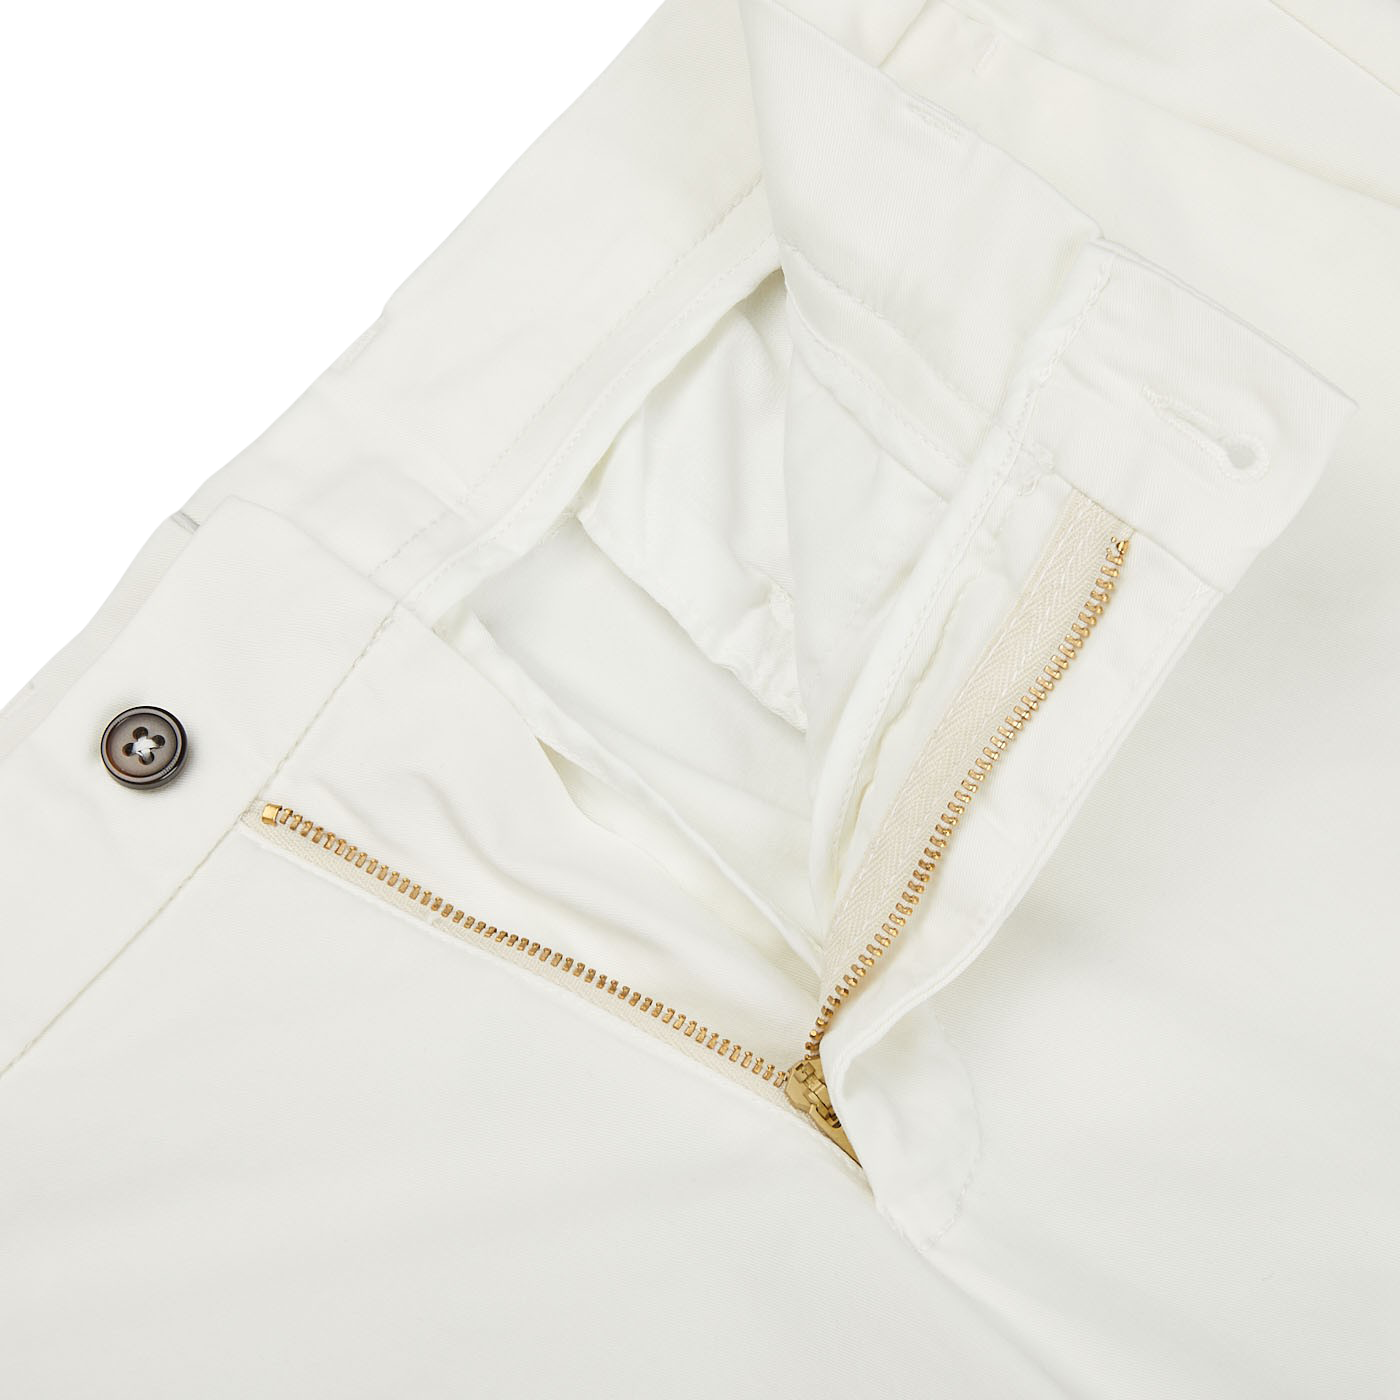 A pair of Berwich Cream White Cotton Stretch Chinos, made with cotton-lyocell fabric, featuring a zipper on the side.